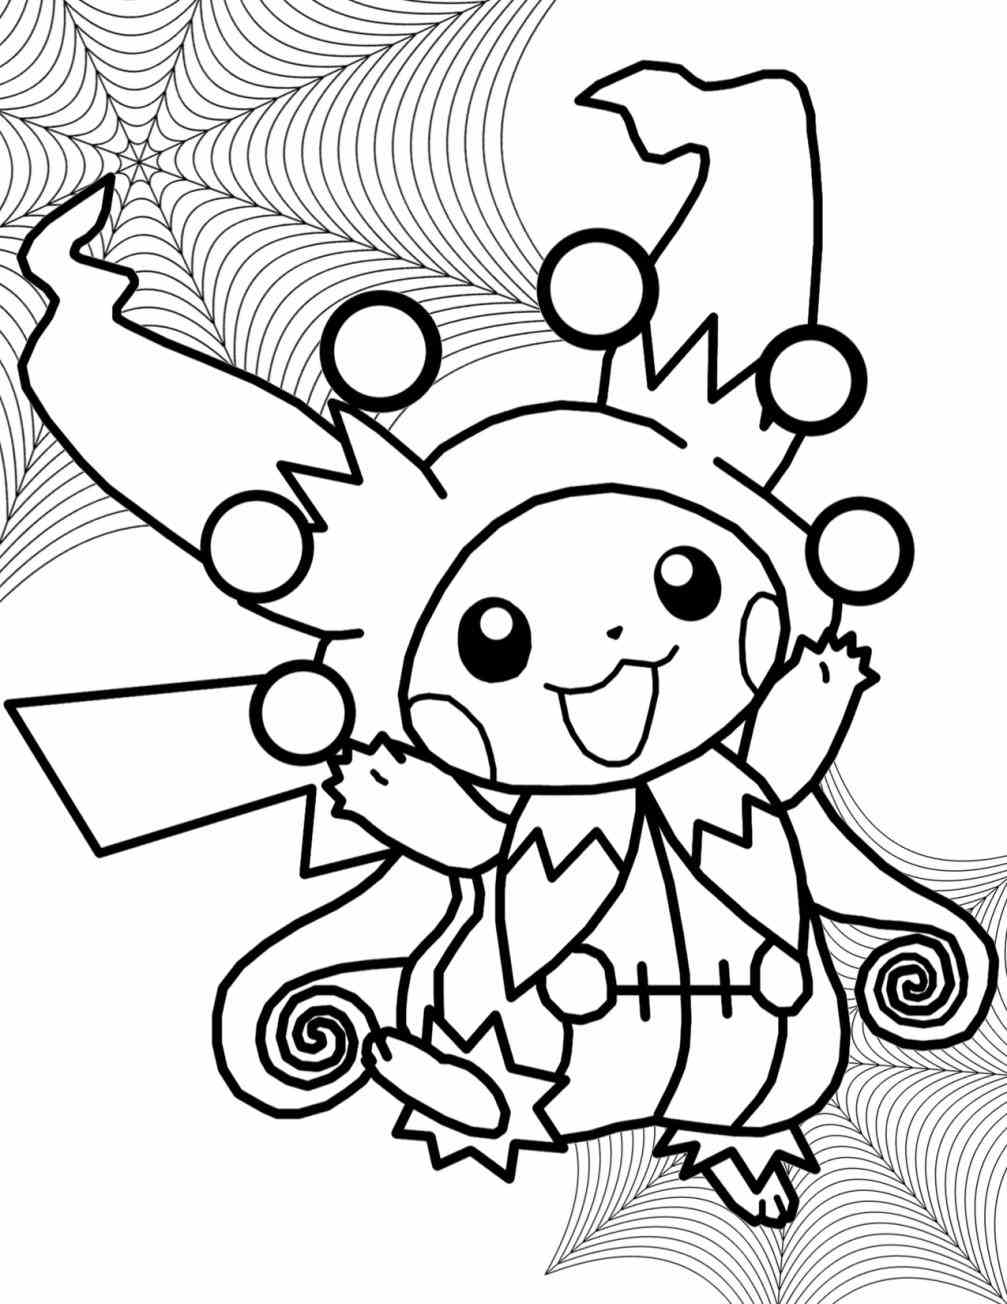 The best free Misty coloring page images. Download from 11 free